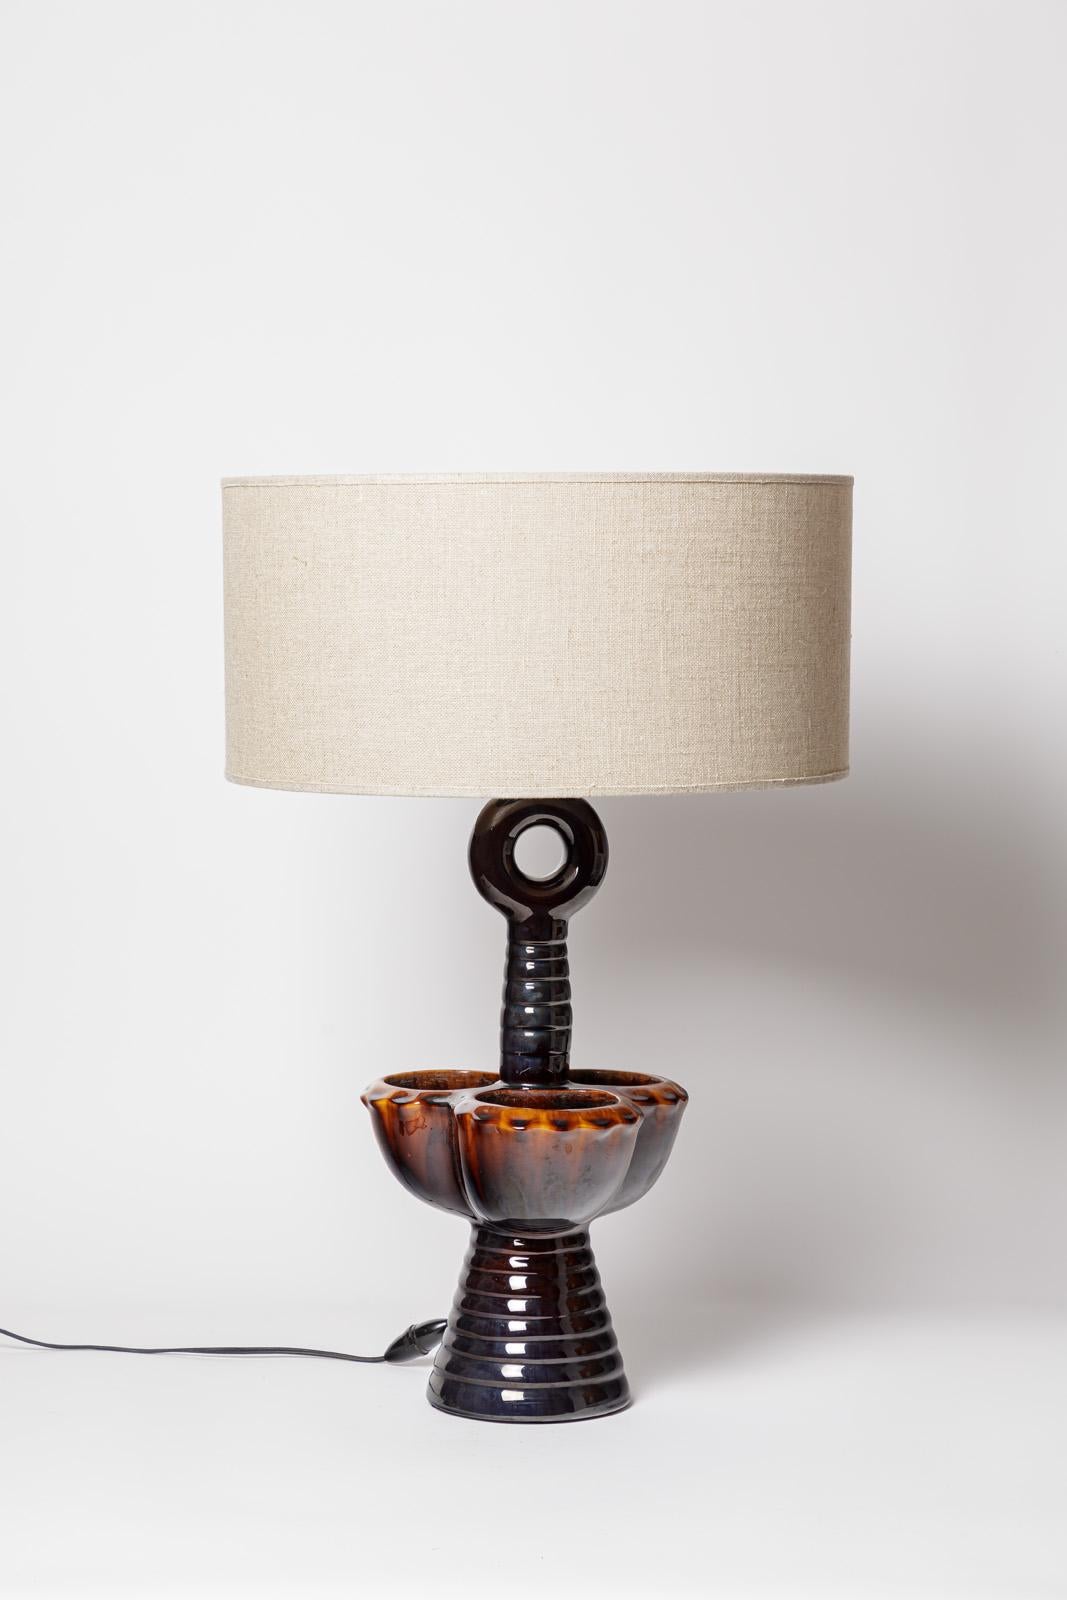 20th Century Large Brown Mid-Century Ceramic Table Lamp by Louis Giraud Vallauris 1950 For Sale